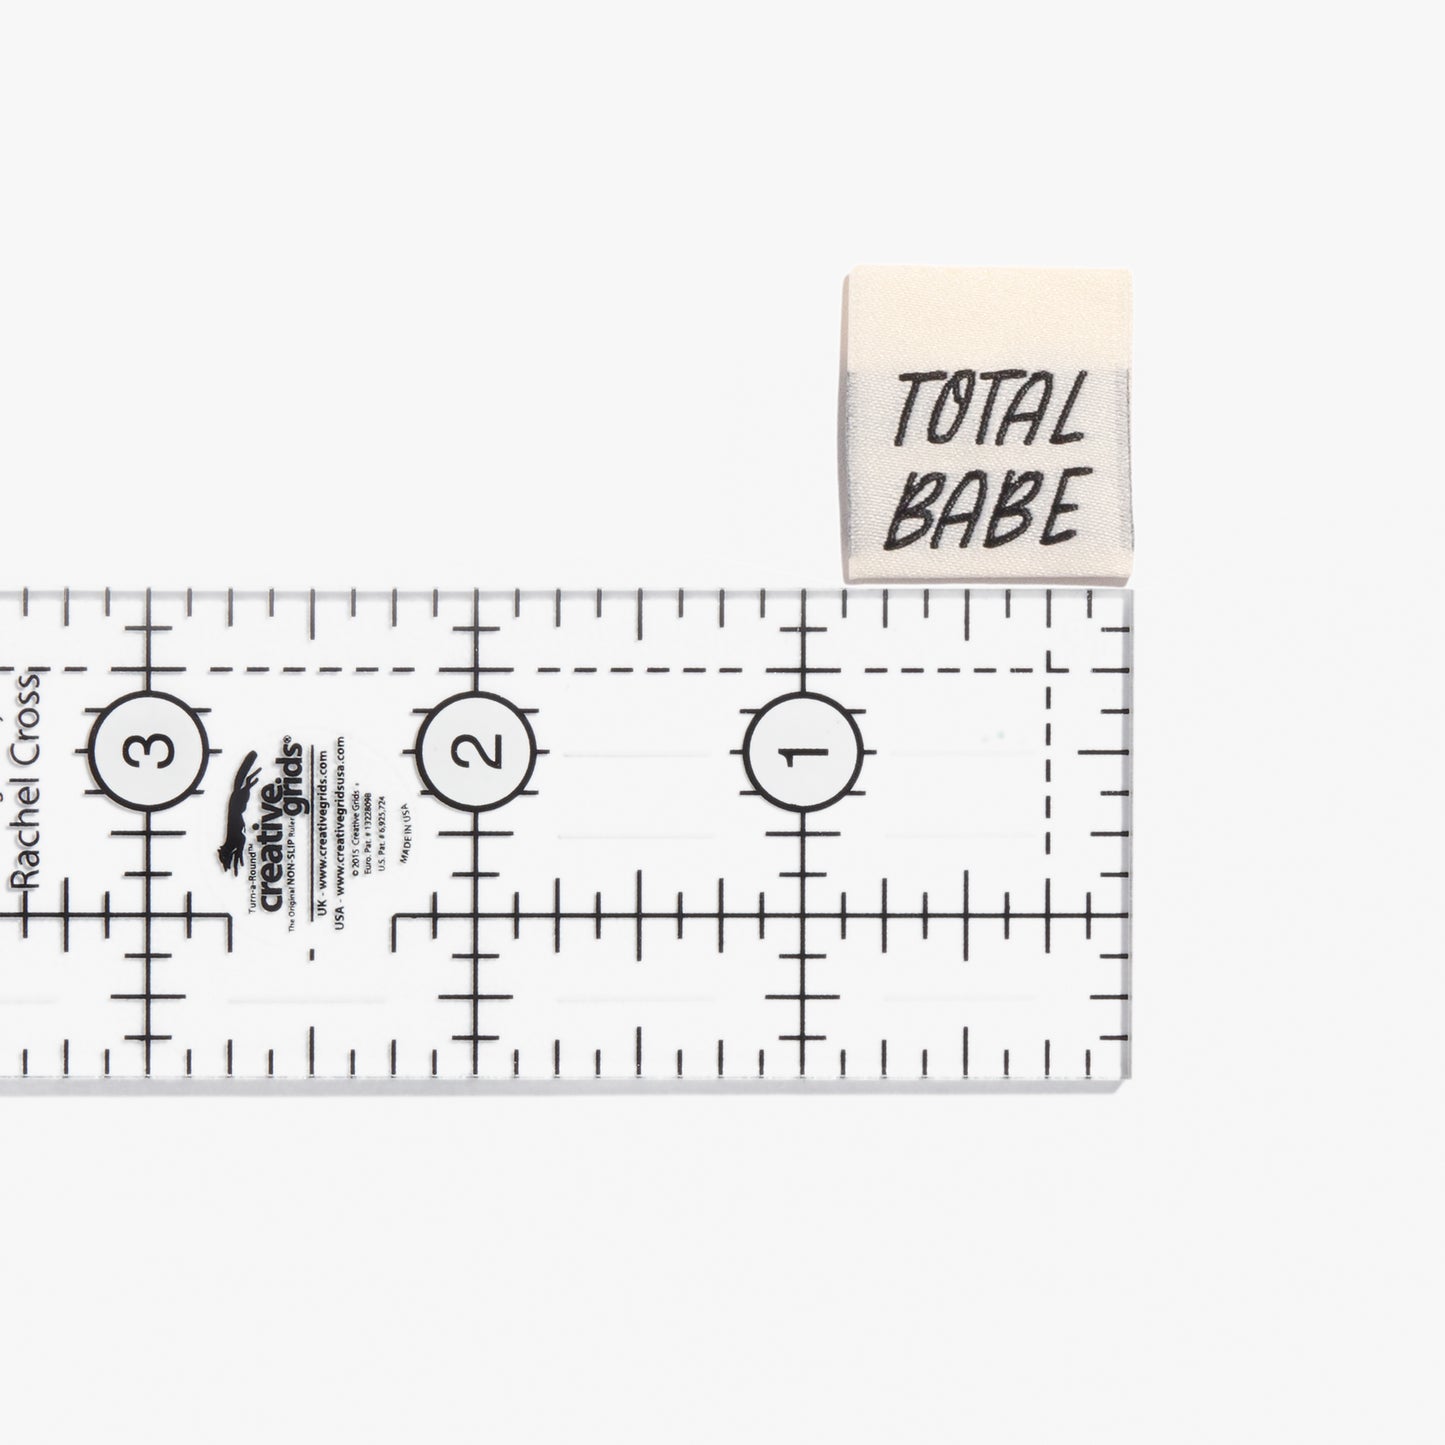 Total Babe - Sew In Labels - Kylie & The Machine